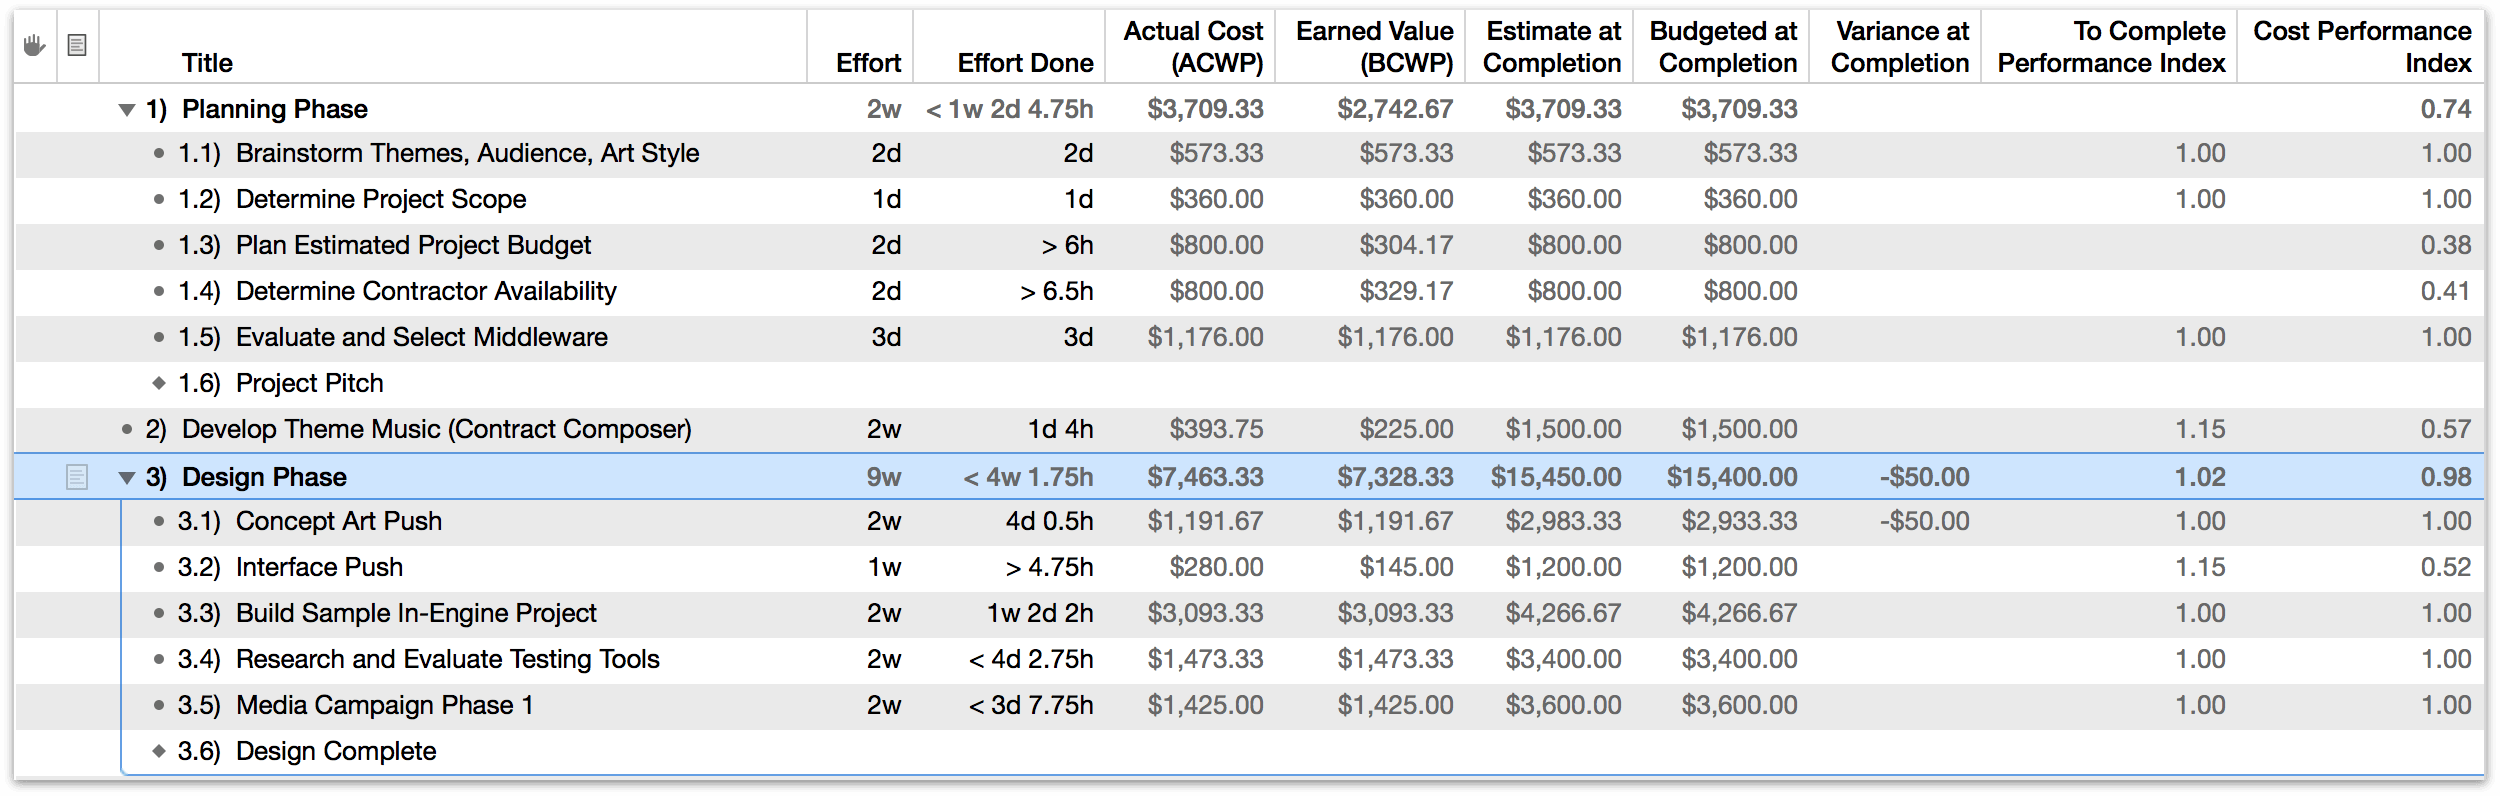 Earned Value Analysis columns related to task completion.